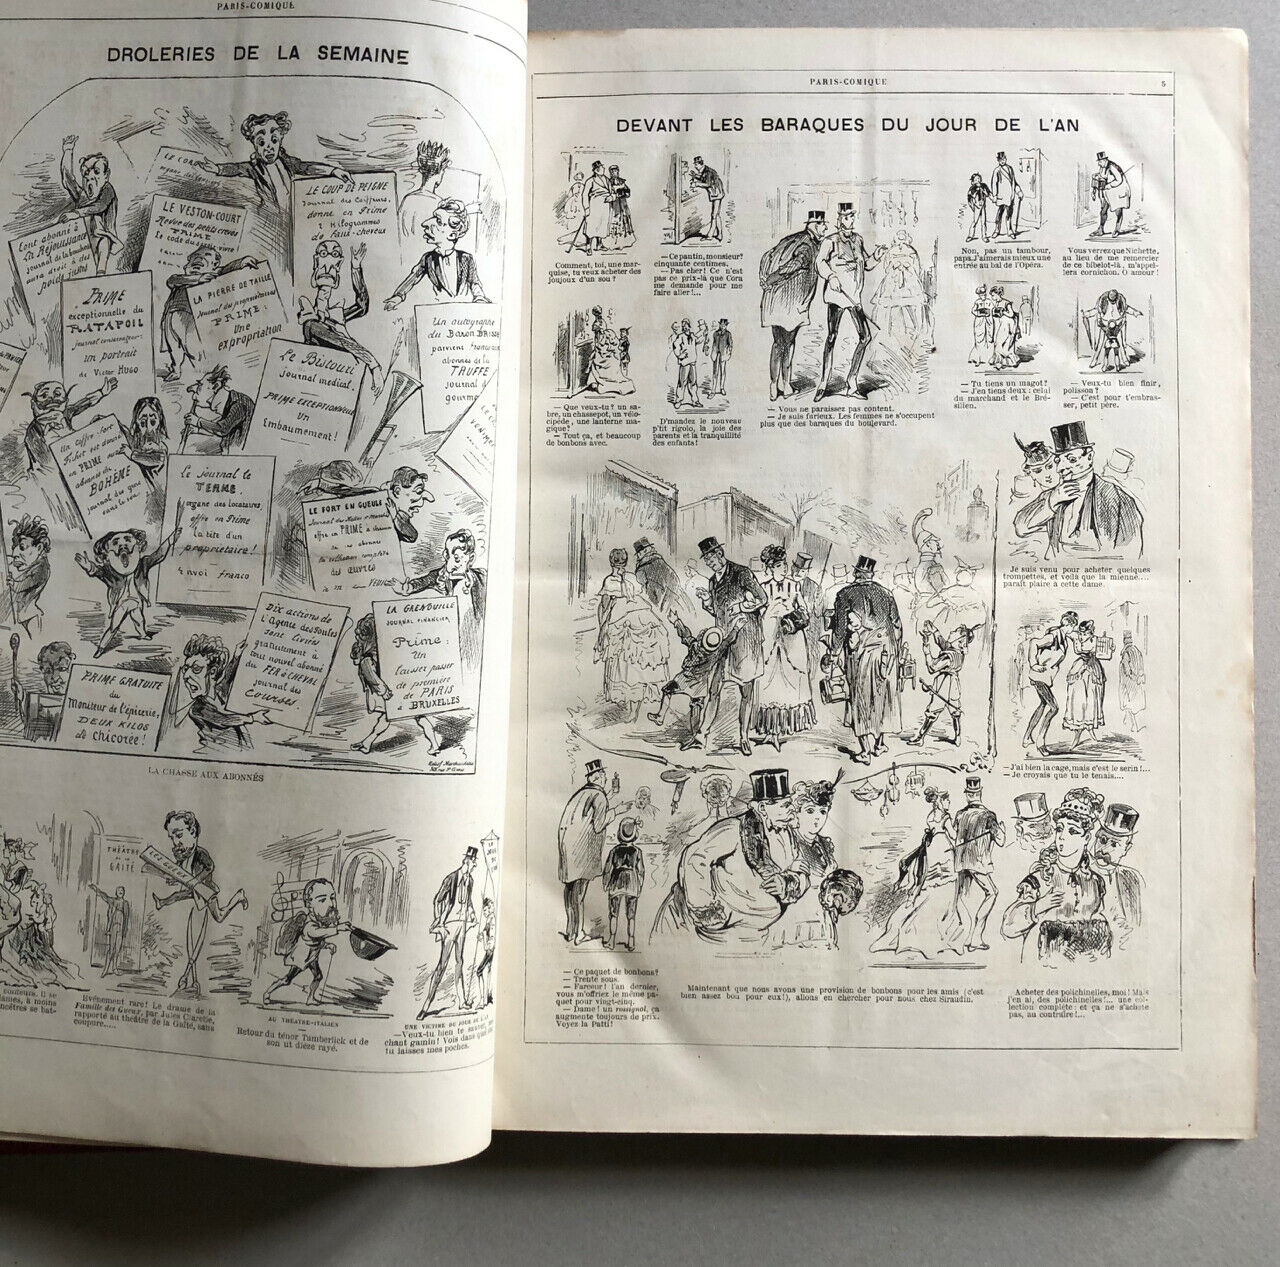 Carlo Gripp — Paris-comique [L'Image] — 52 issues — first full year — 1869.